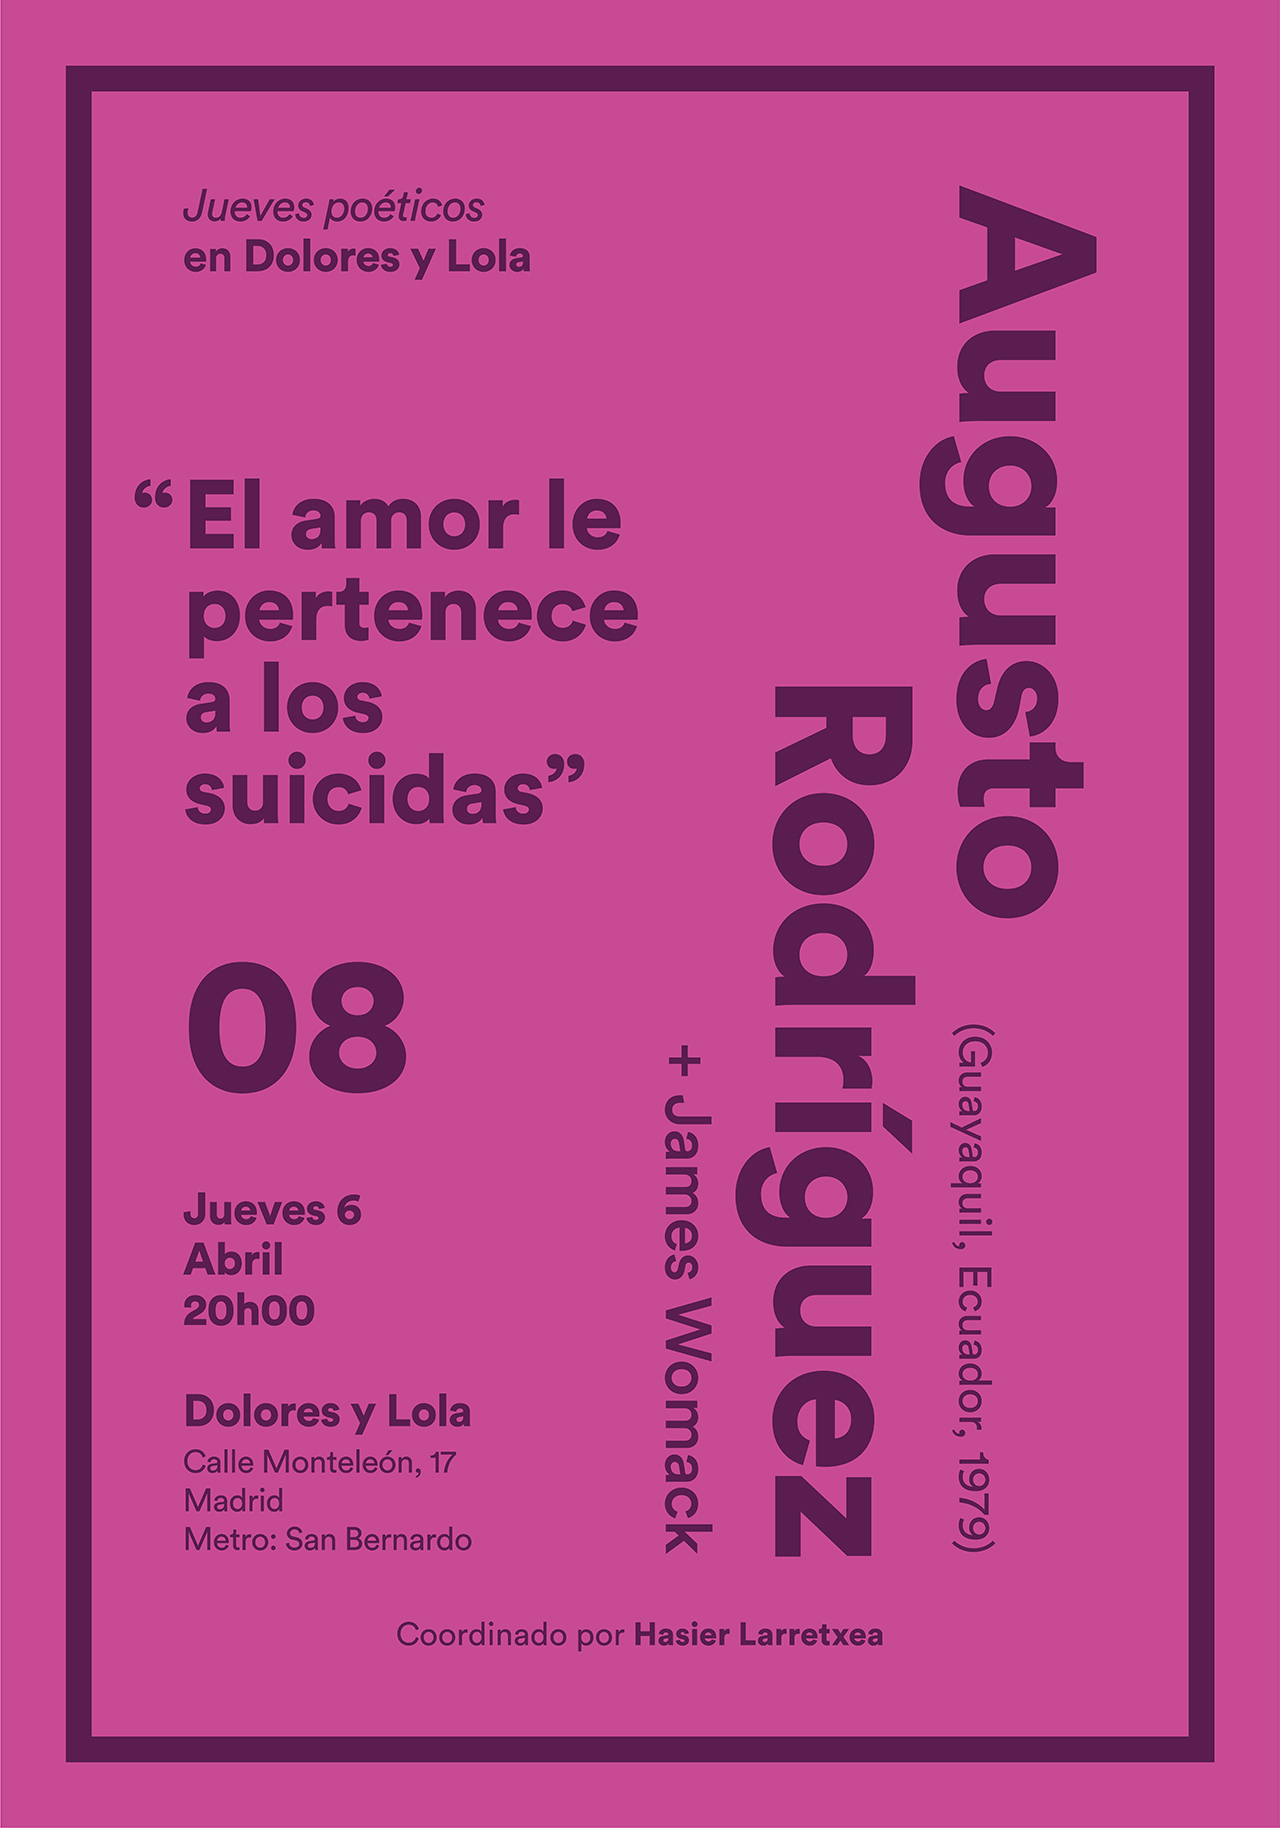 08_augusto_poster